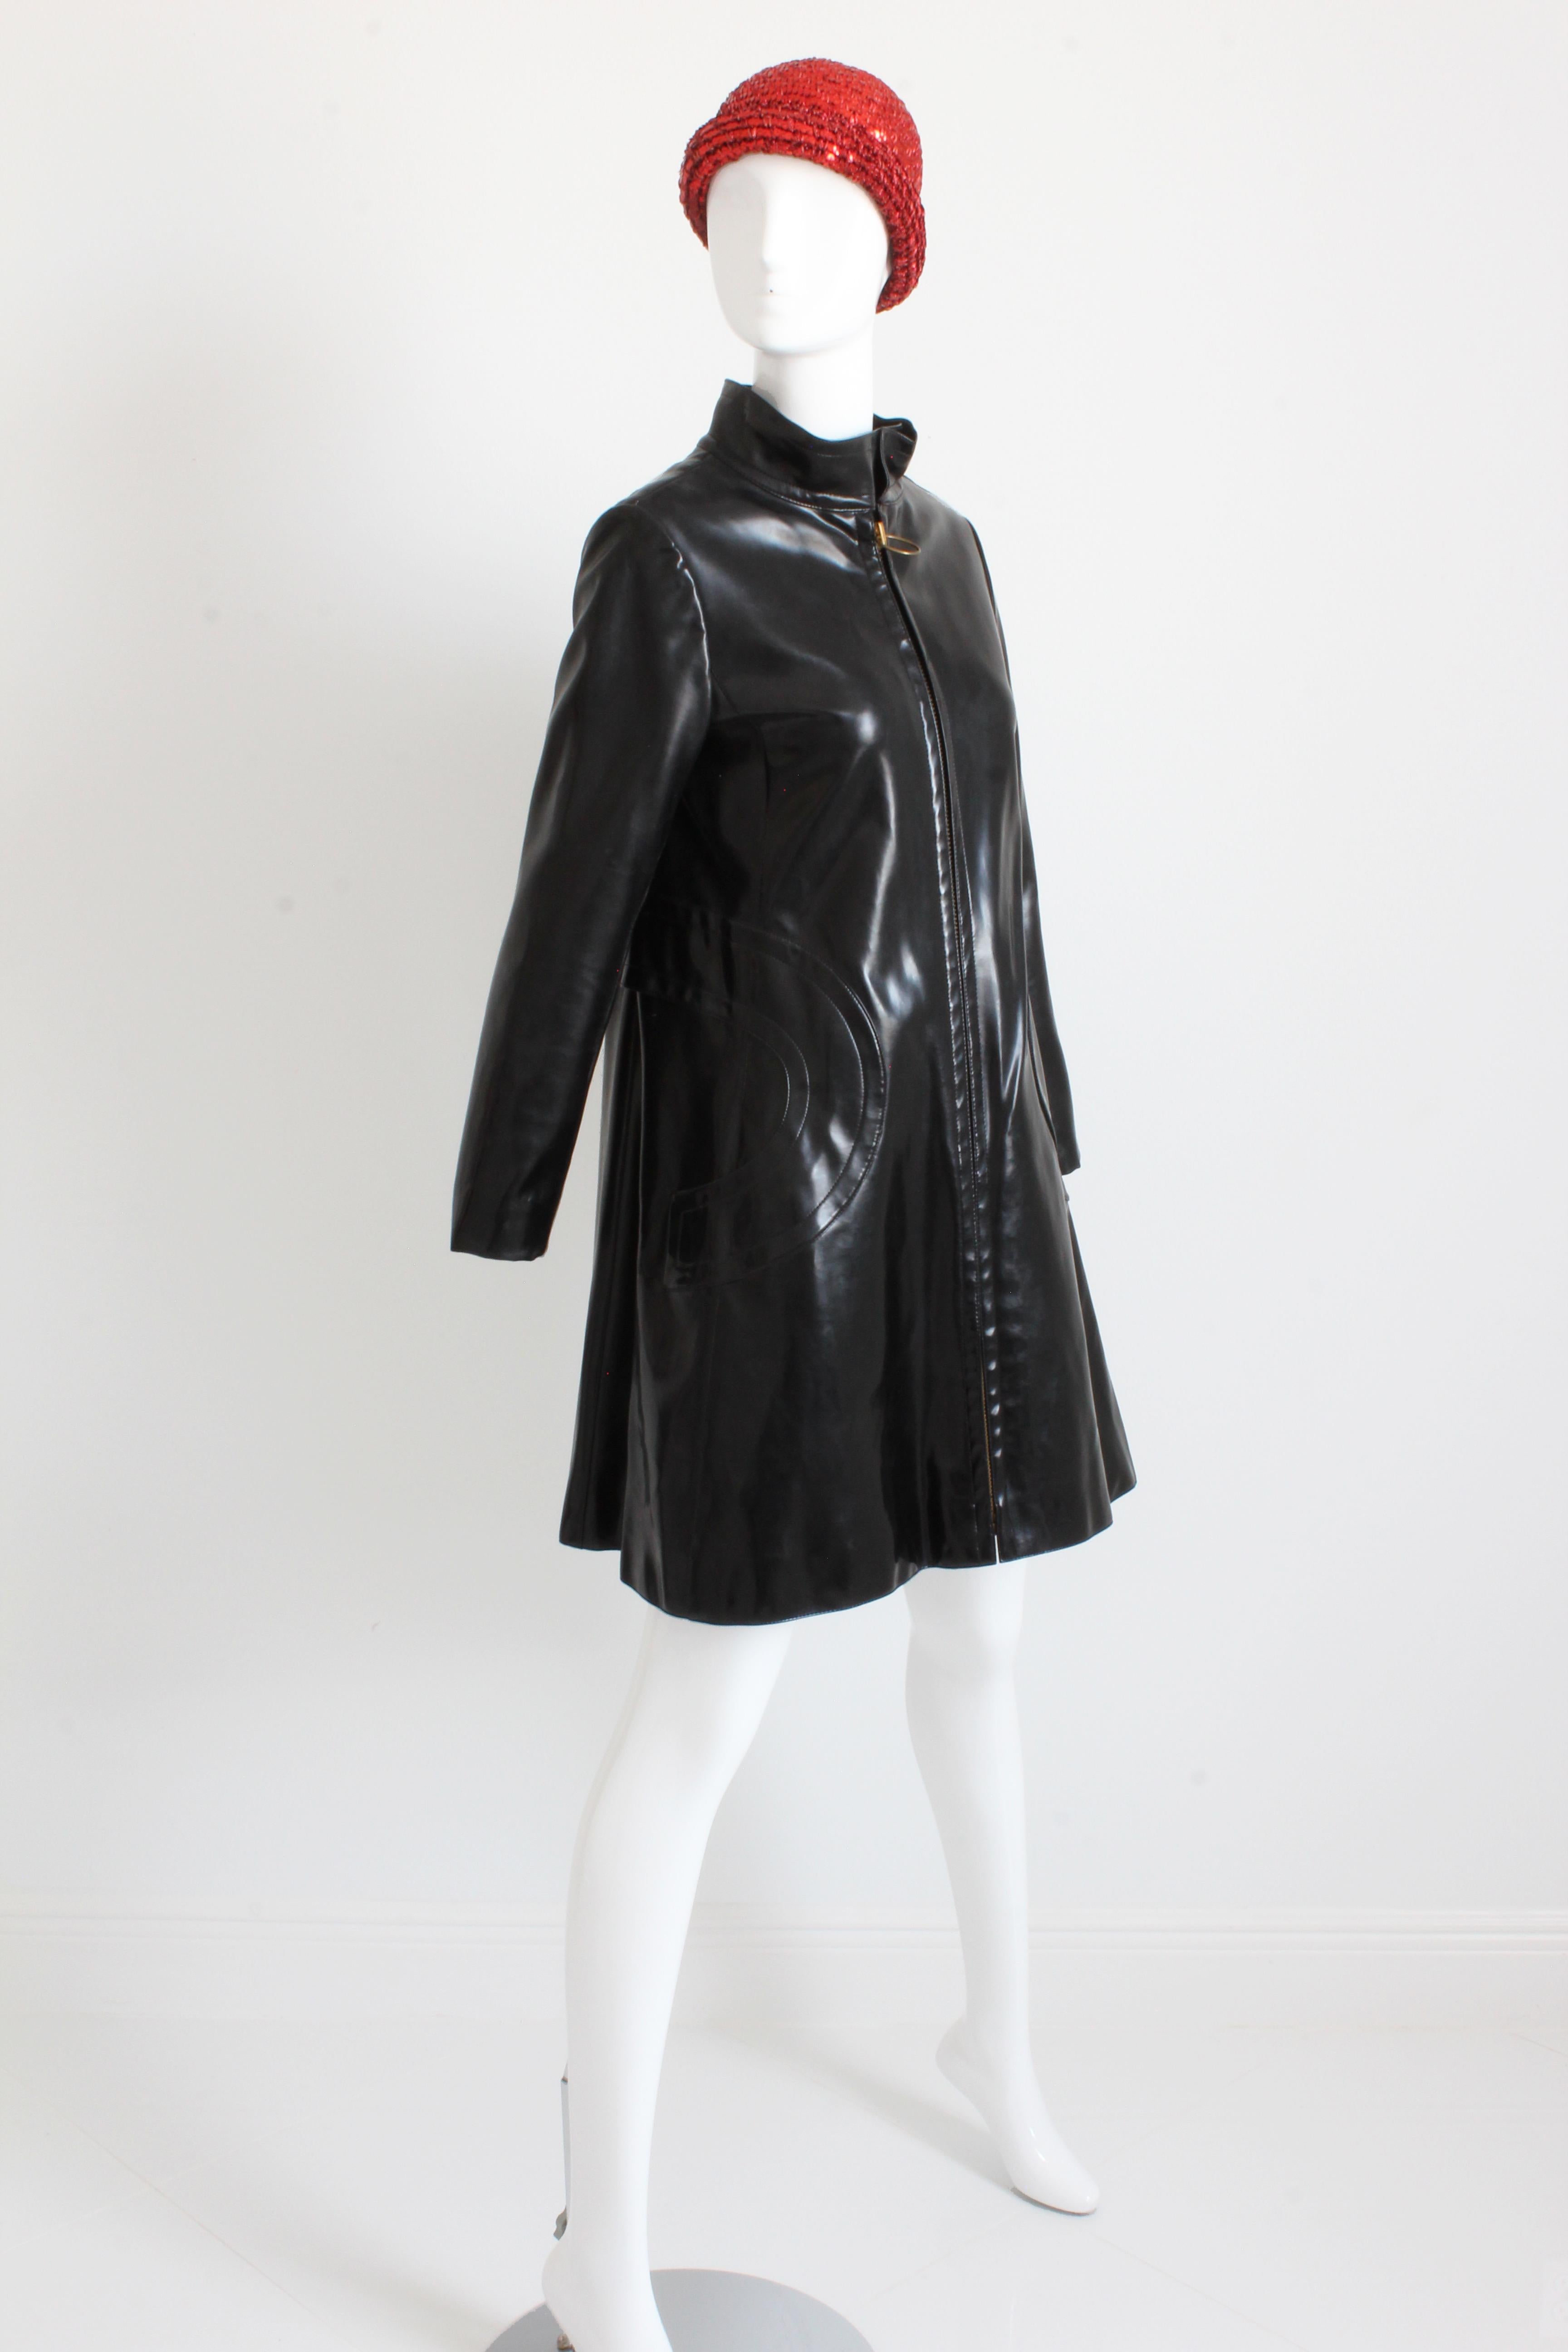 This incredible coat was made by Pierre Cardin for his Space Age and Futurism collection in 1969. Made from black vinyl, it features a mod silhouette with flared hem, a chunky zip front with brass circle pull, and circular stitching trimming the